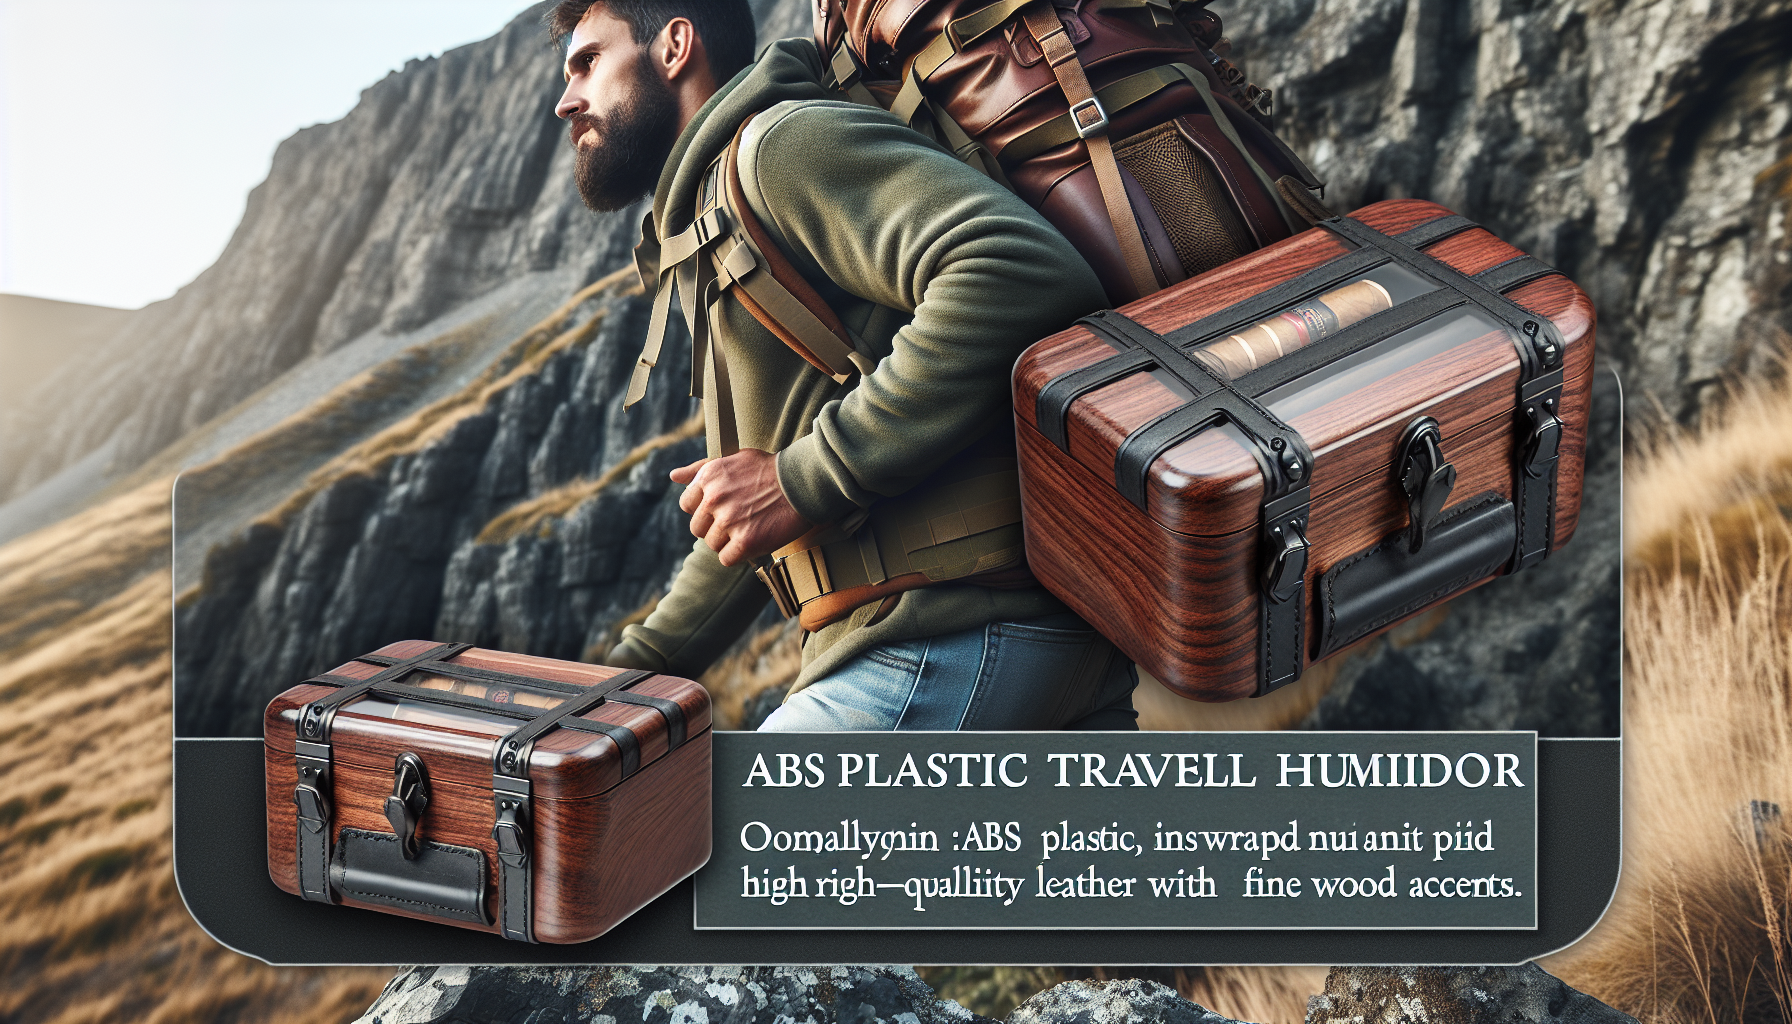 Durable travel humidor for journey-ready cigar protection